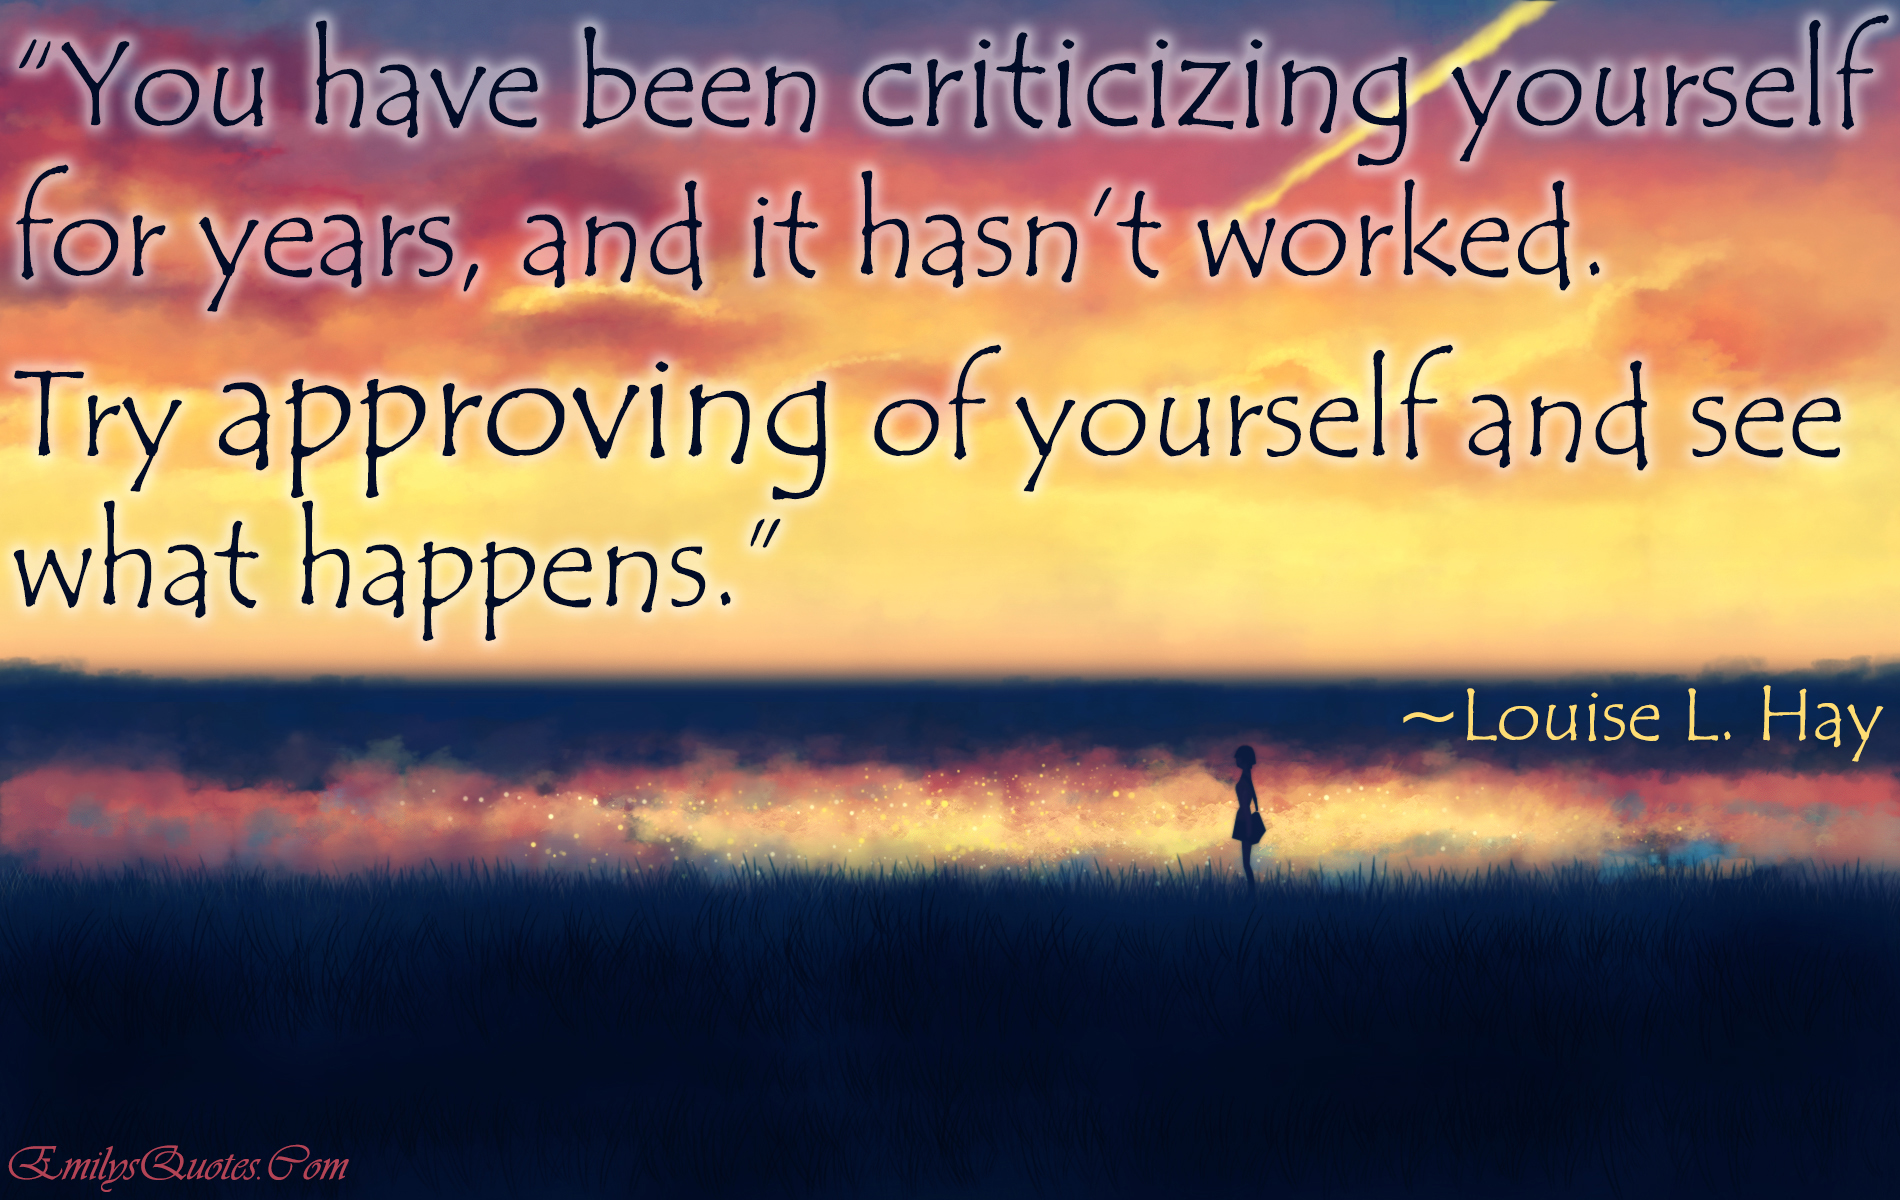 You have been criticizing yourself for years, and it hasn’t worked. Try approving of yourself and see what happens